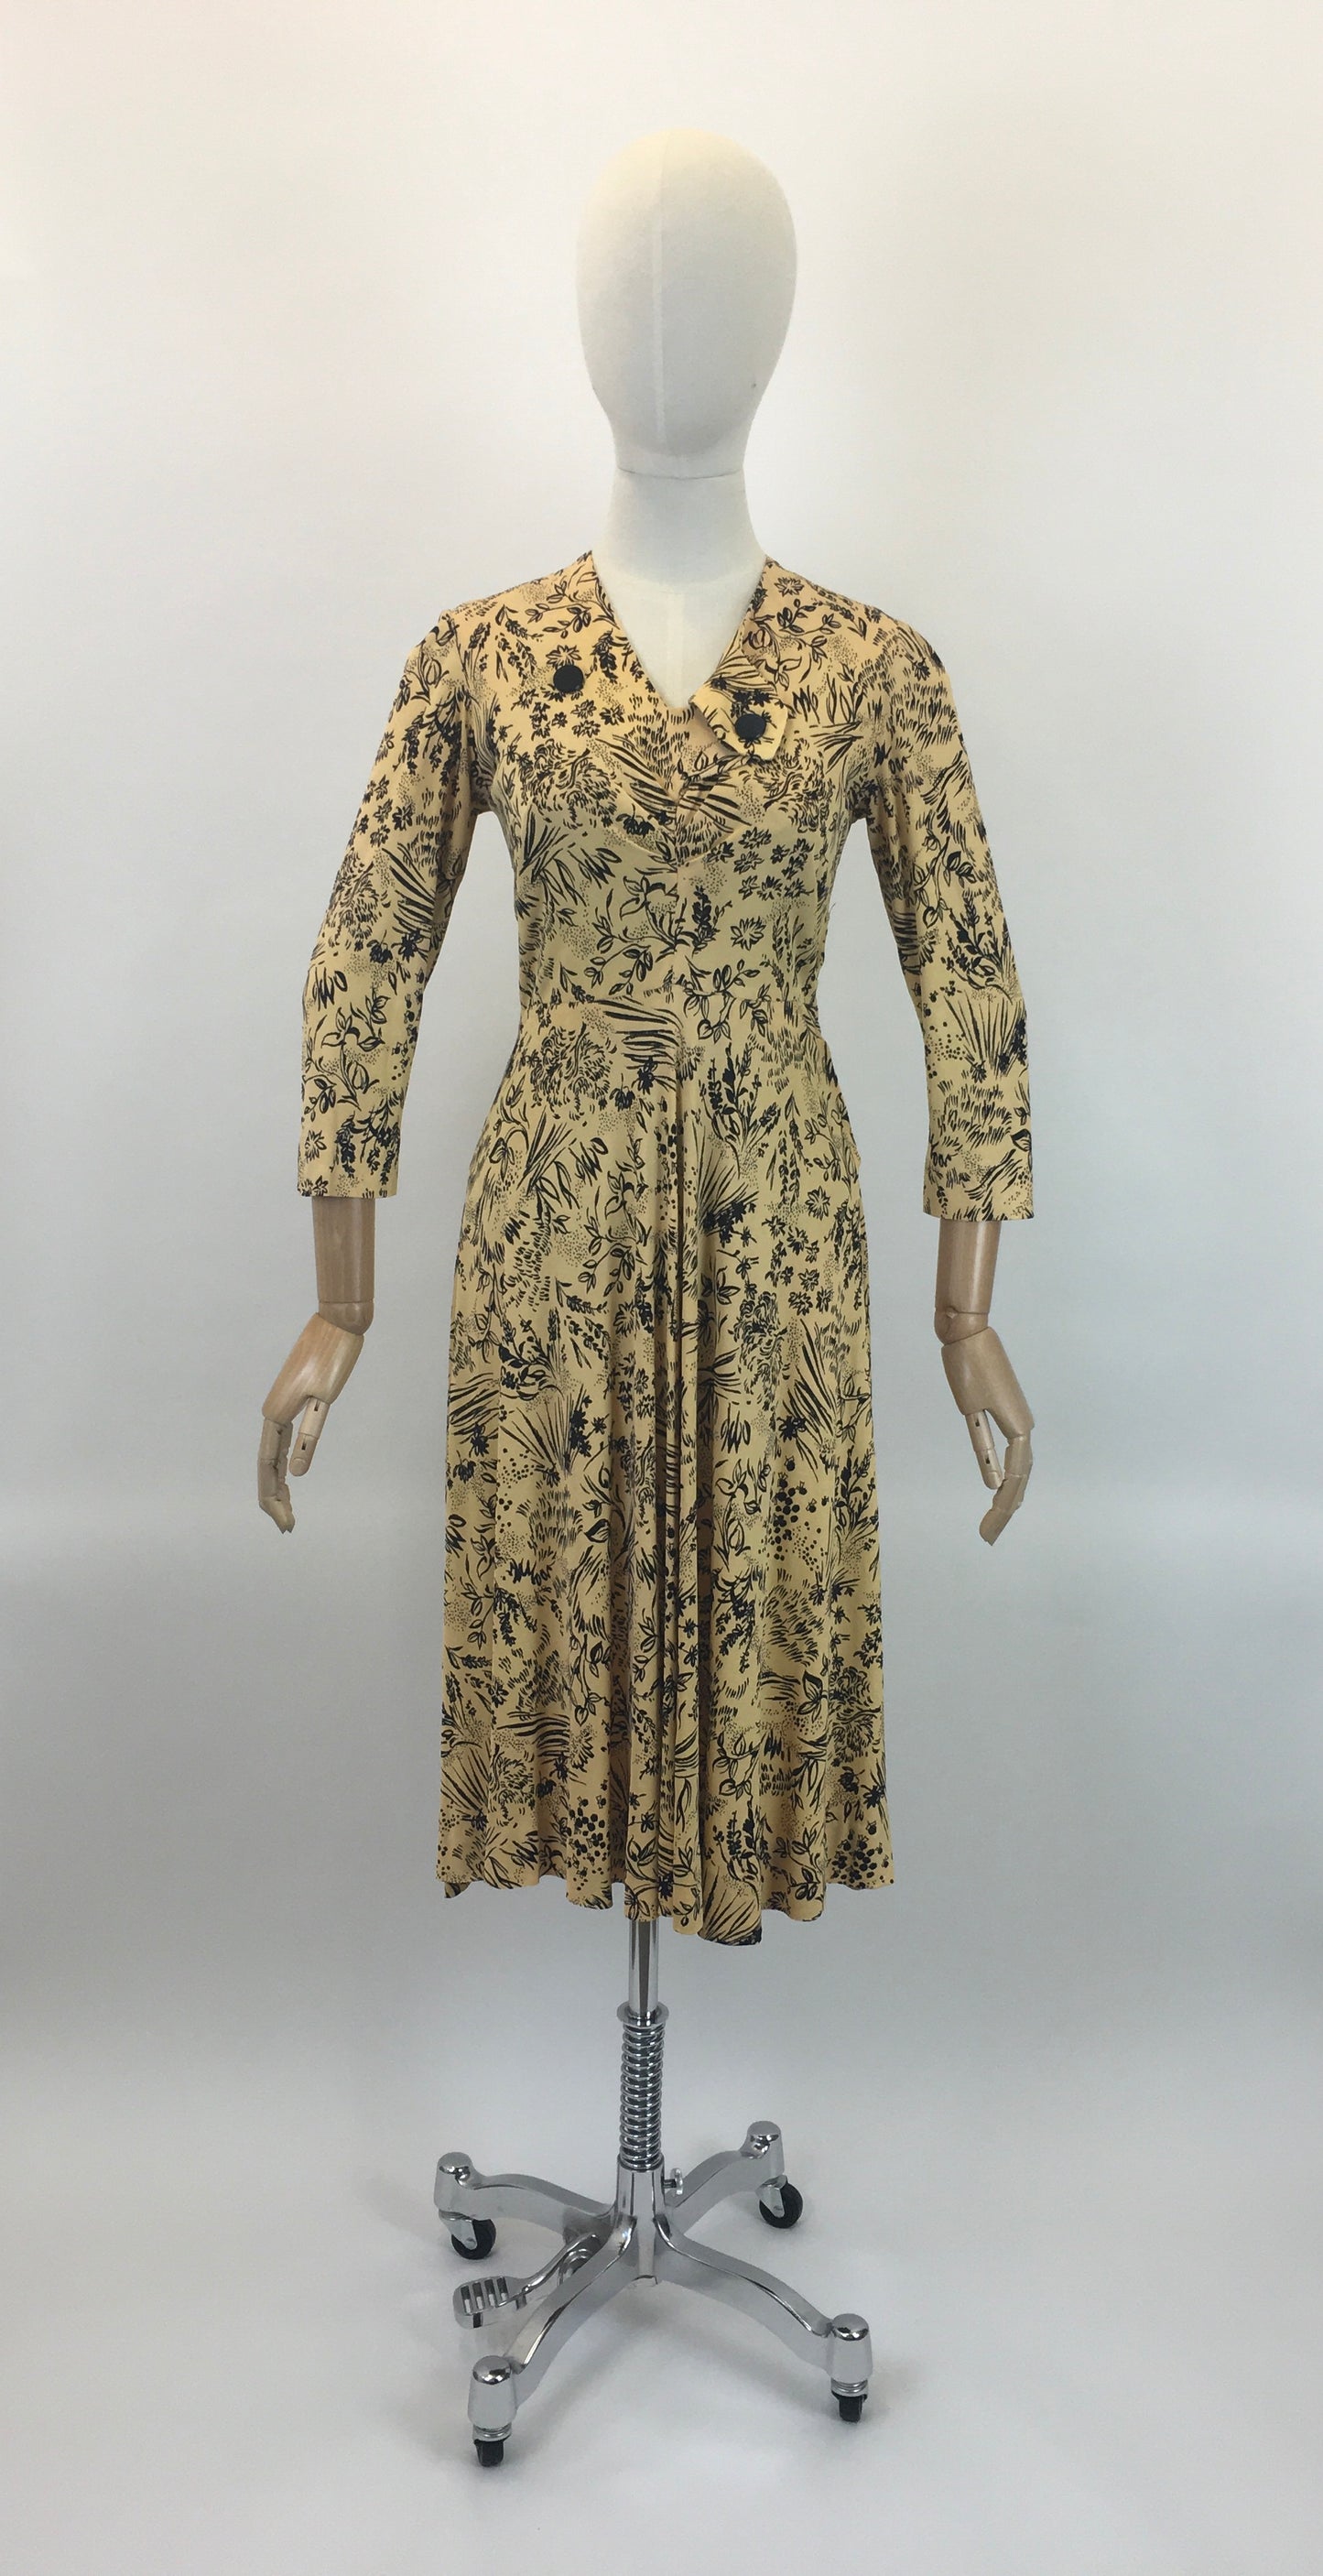 Original 1940’s Stunning Rayon Jersey Dress by ‘ Wolsey’ - In A Soft Corn with Black Print